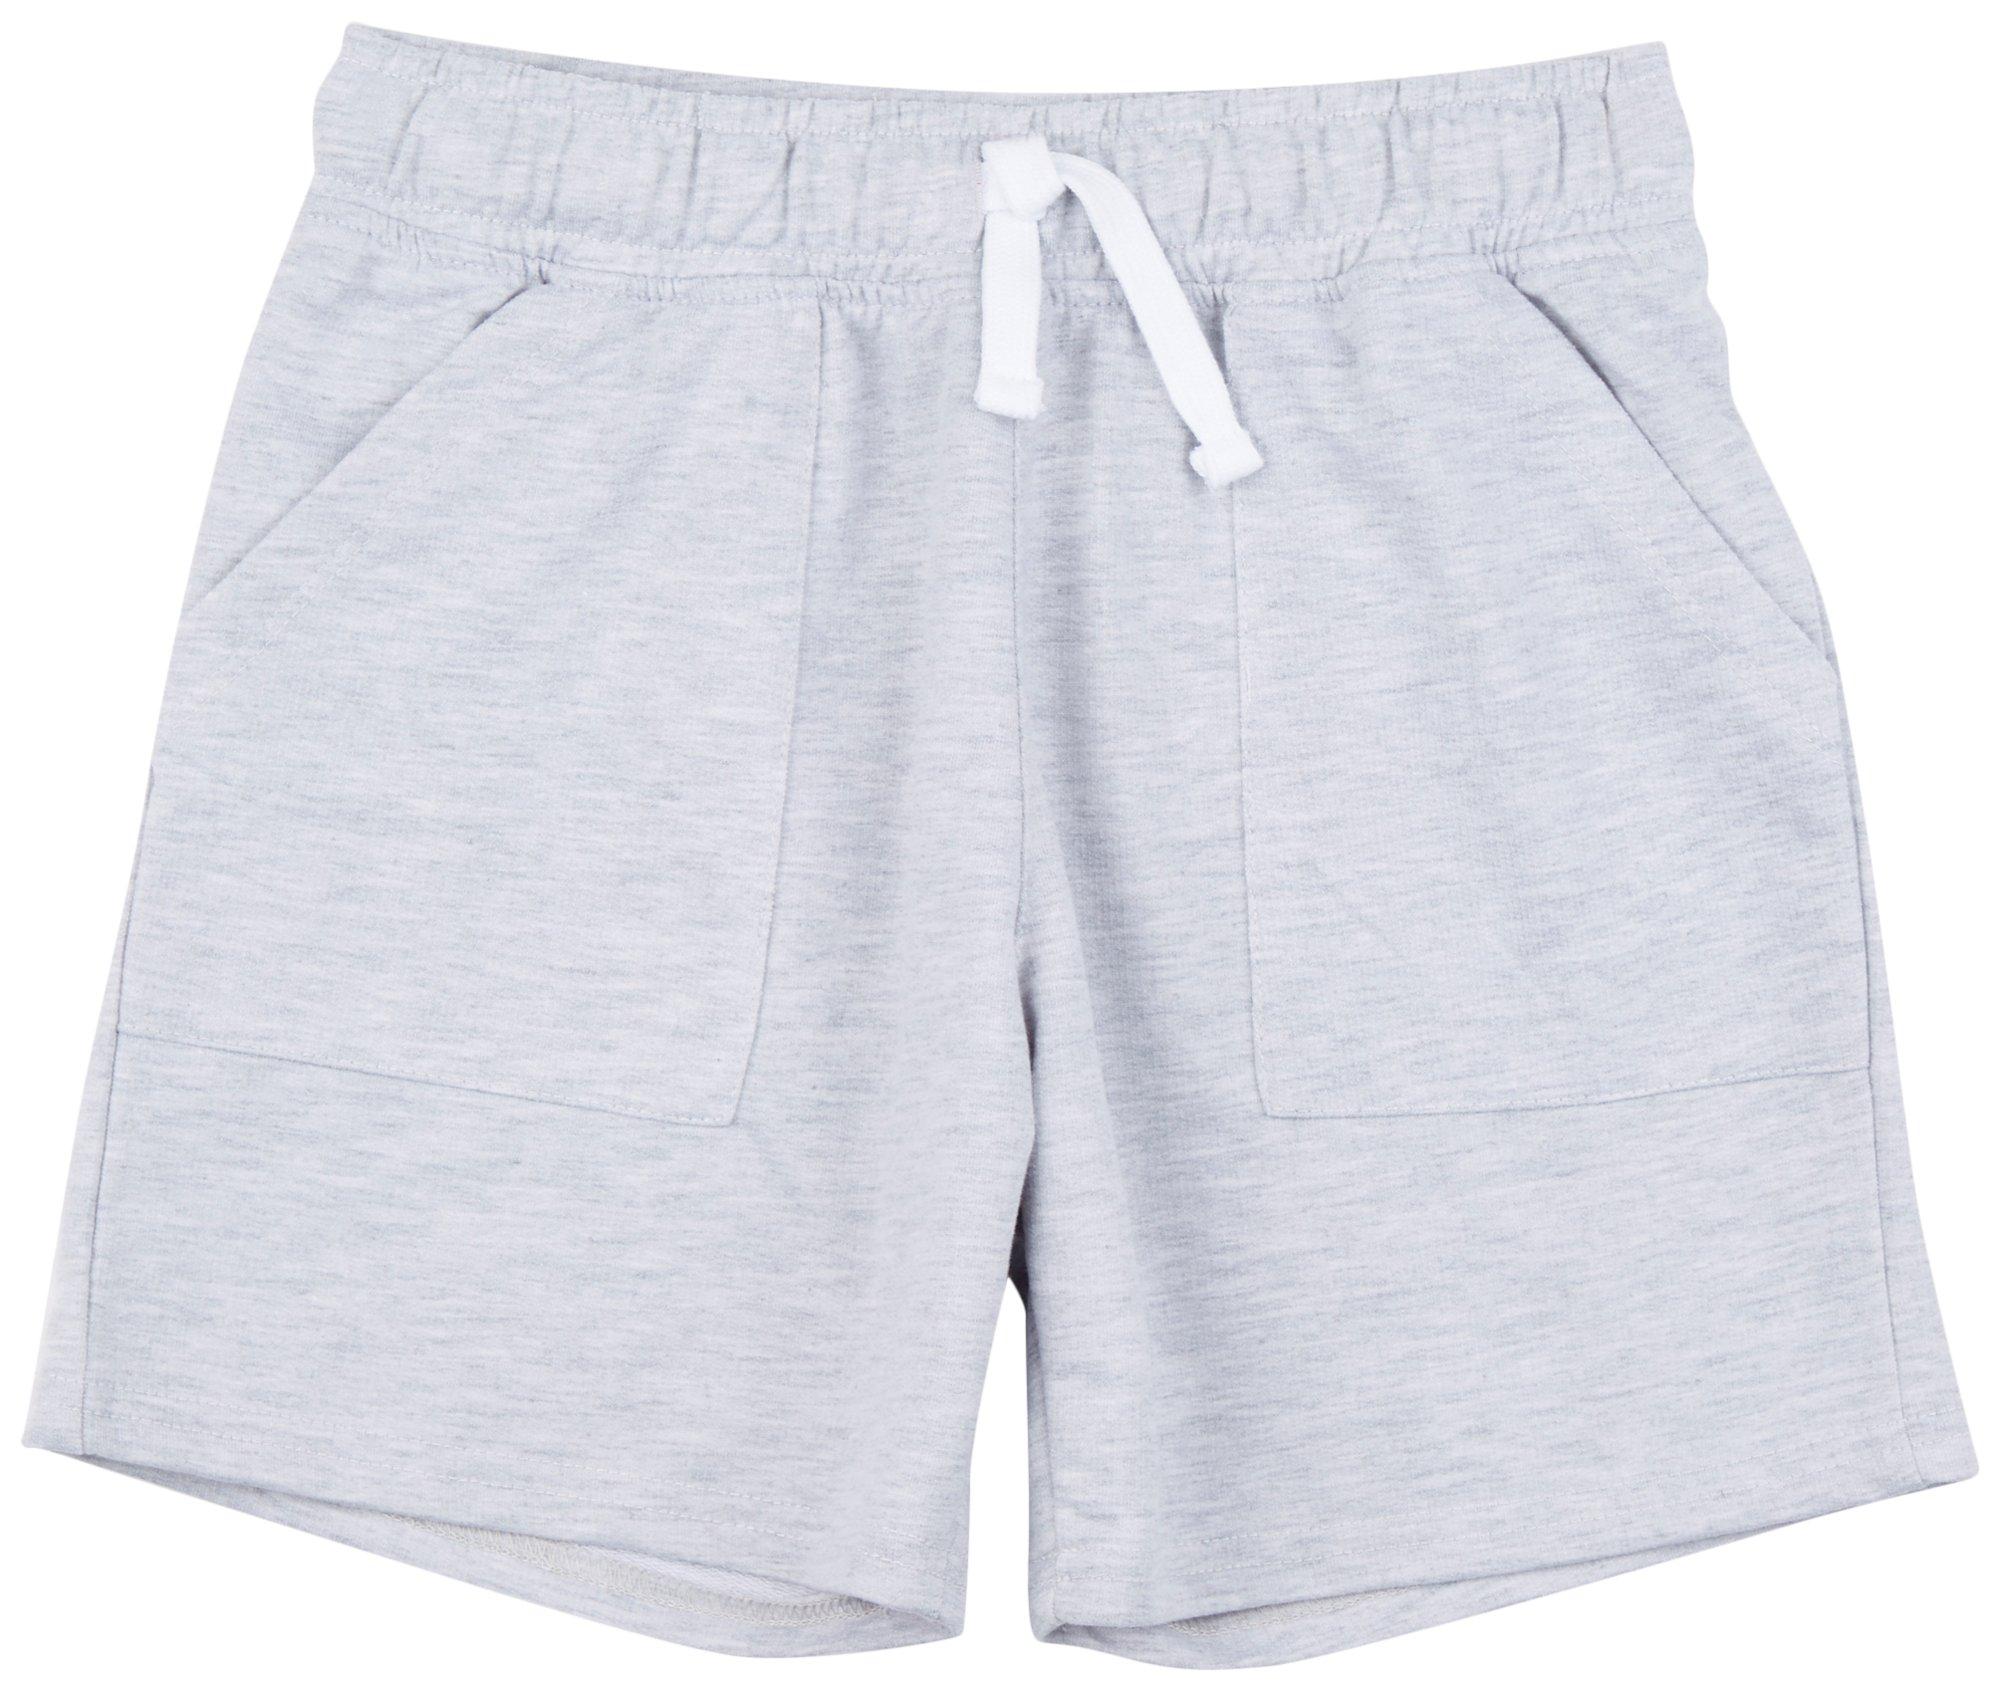 DOT & ZAZZ Little Boys French Terry Solid Shorts